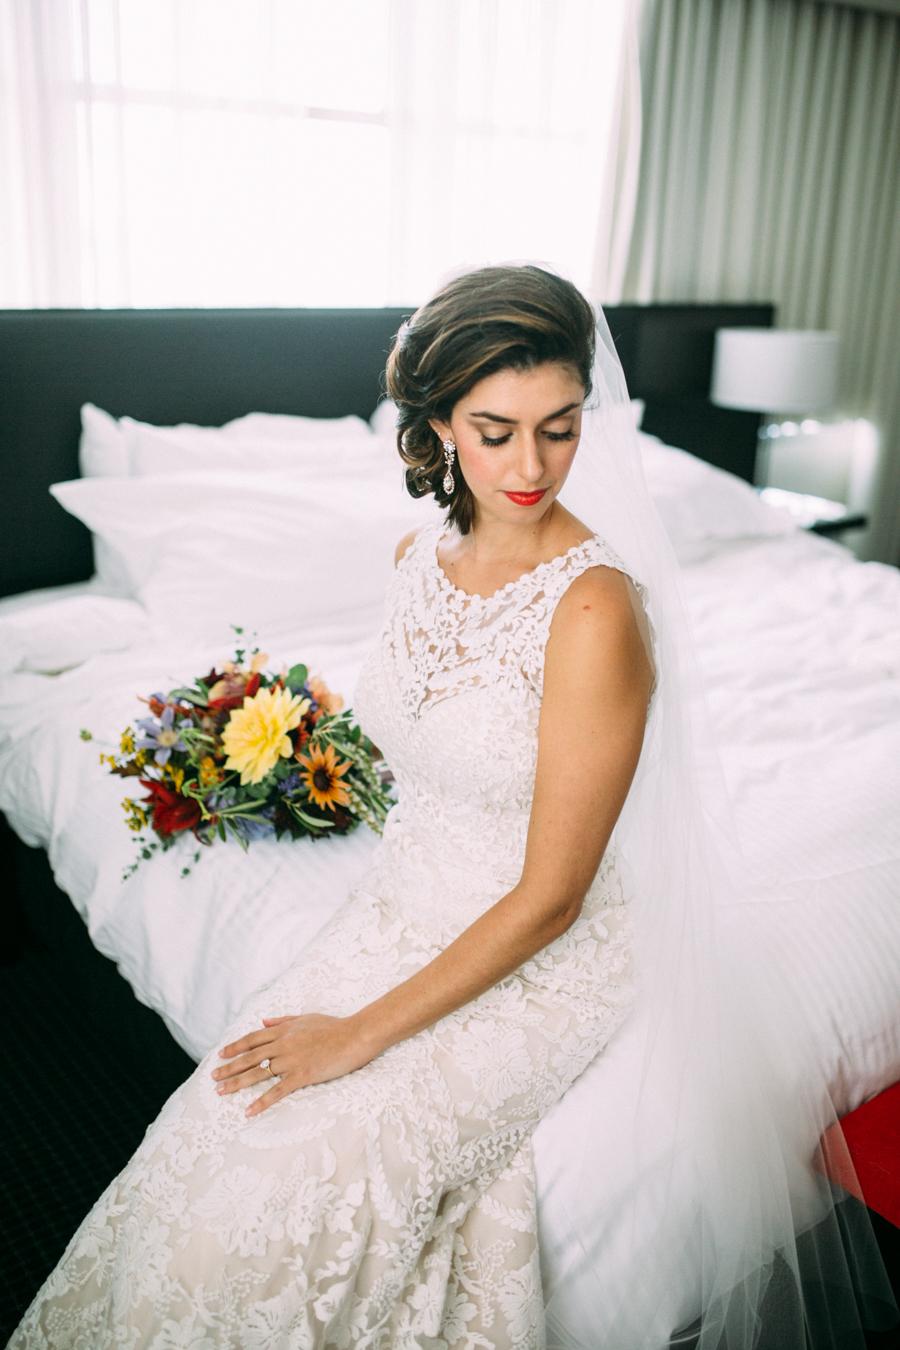 Mediterranean Wedding at the American Swedish Historical Museum Brae Howard Photography Philly In Love Philadelphia Weddings Philadelphia Wedding Blog